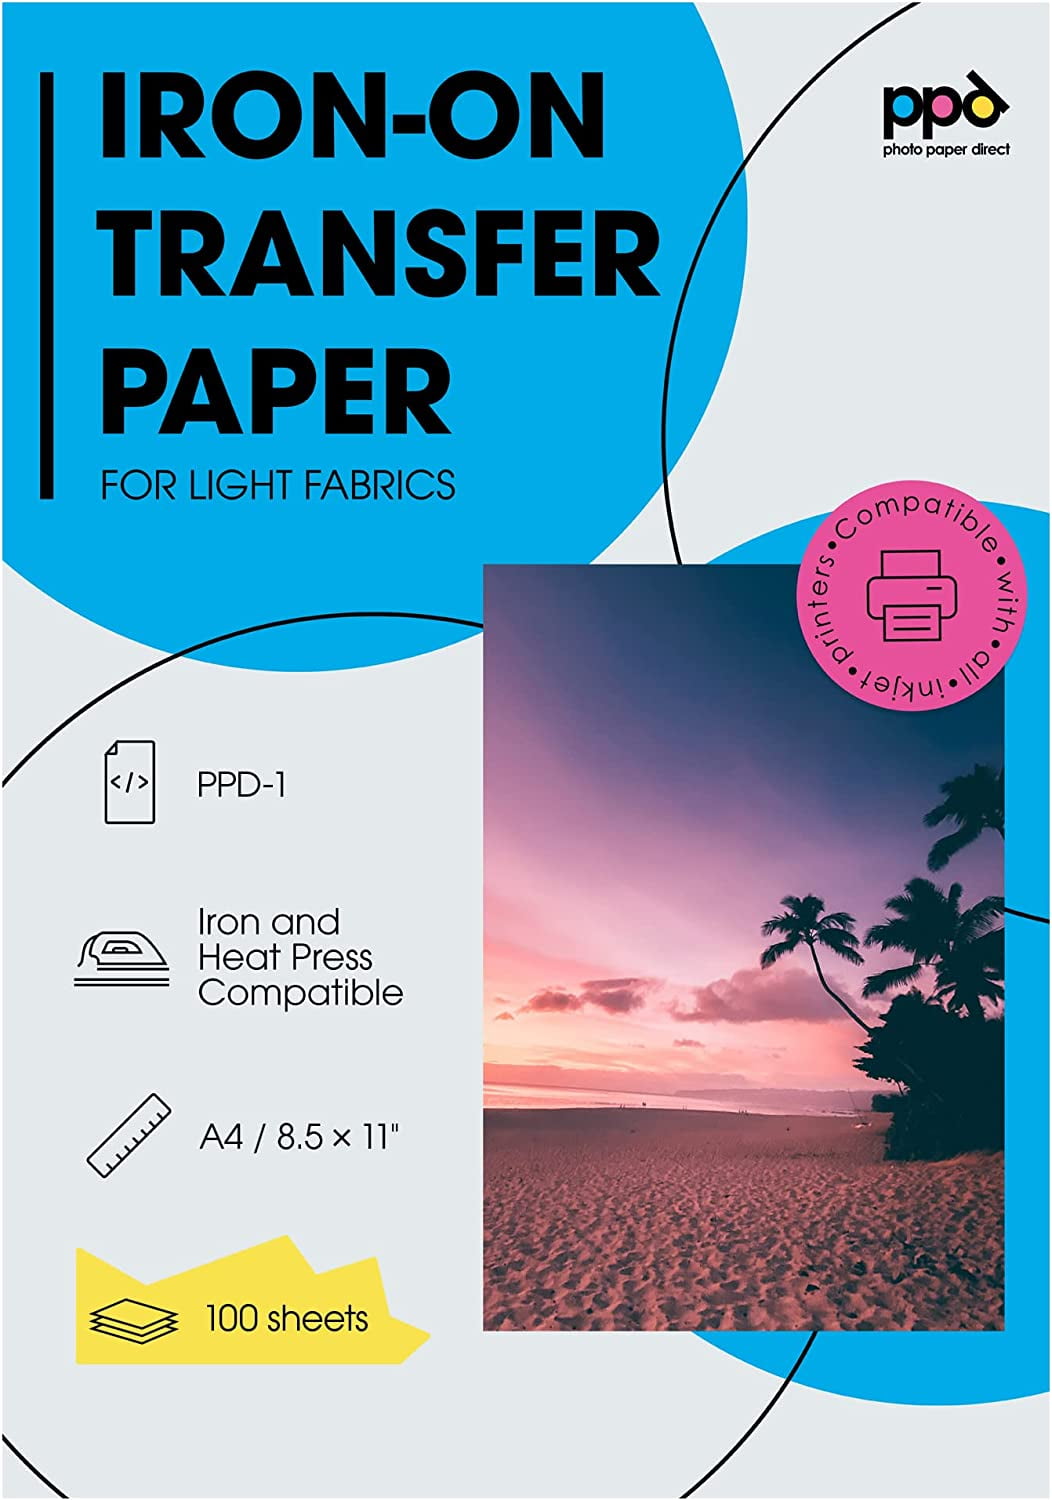 100 Sheets of Carbon Transfer Copy Paper One-Side Transfer Paper A4 Carbon Paper